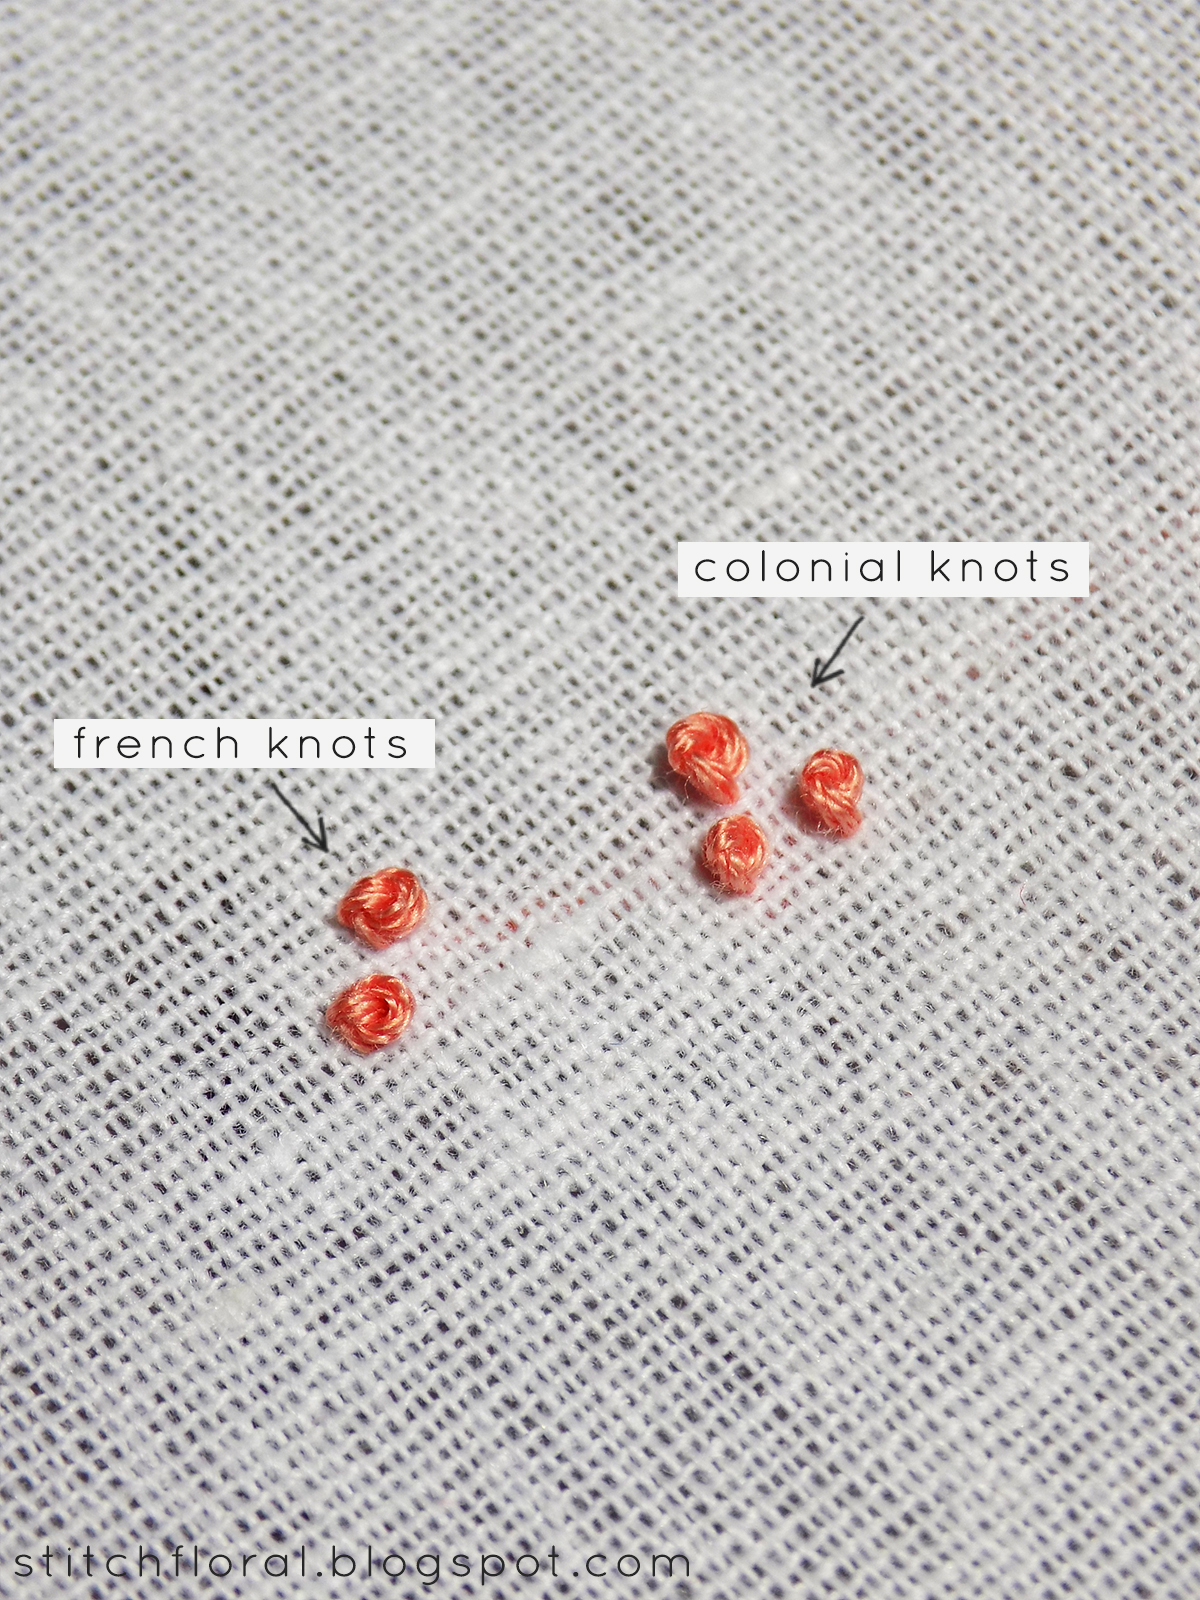 French Knot Embroidery Patterns Colonial Knot And Hows It Different From French Knot Stitch Floral